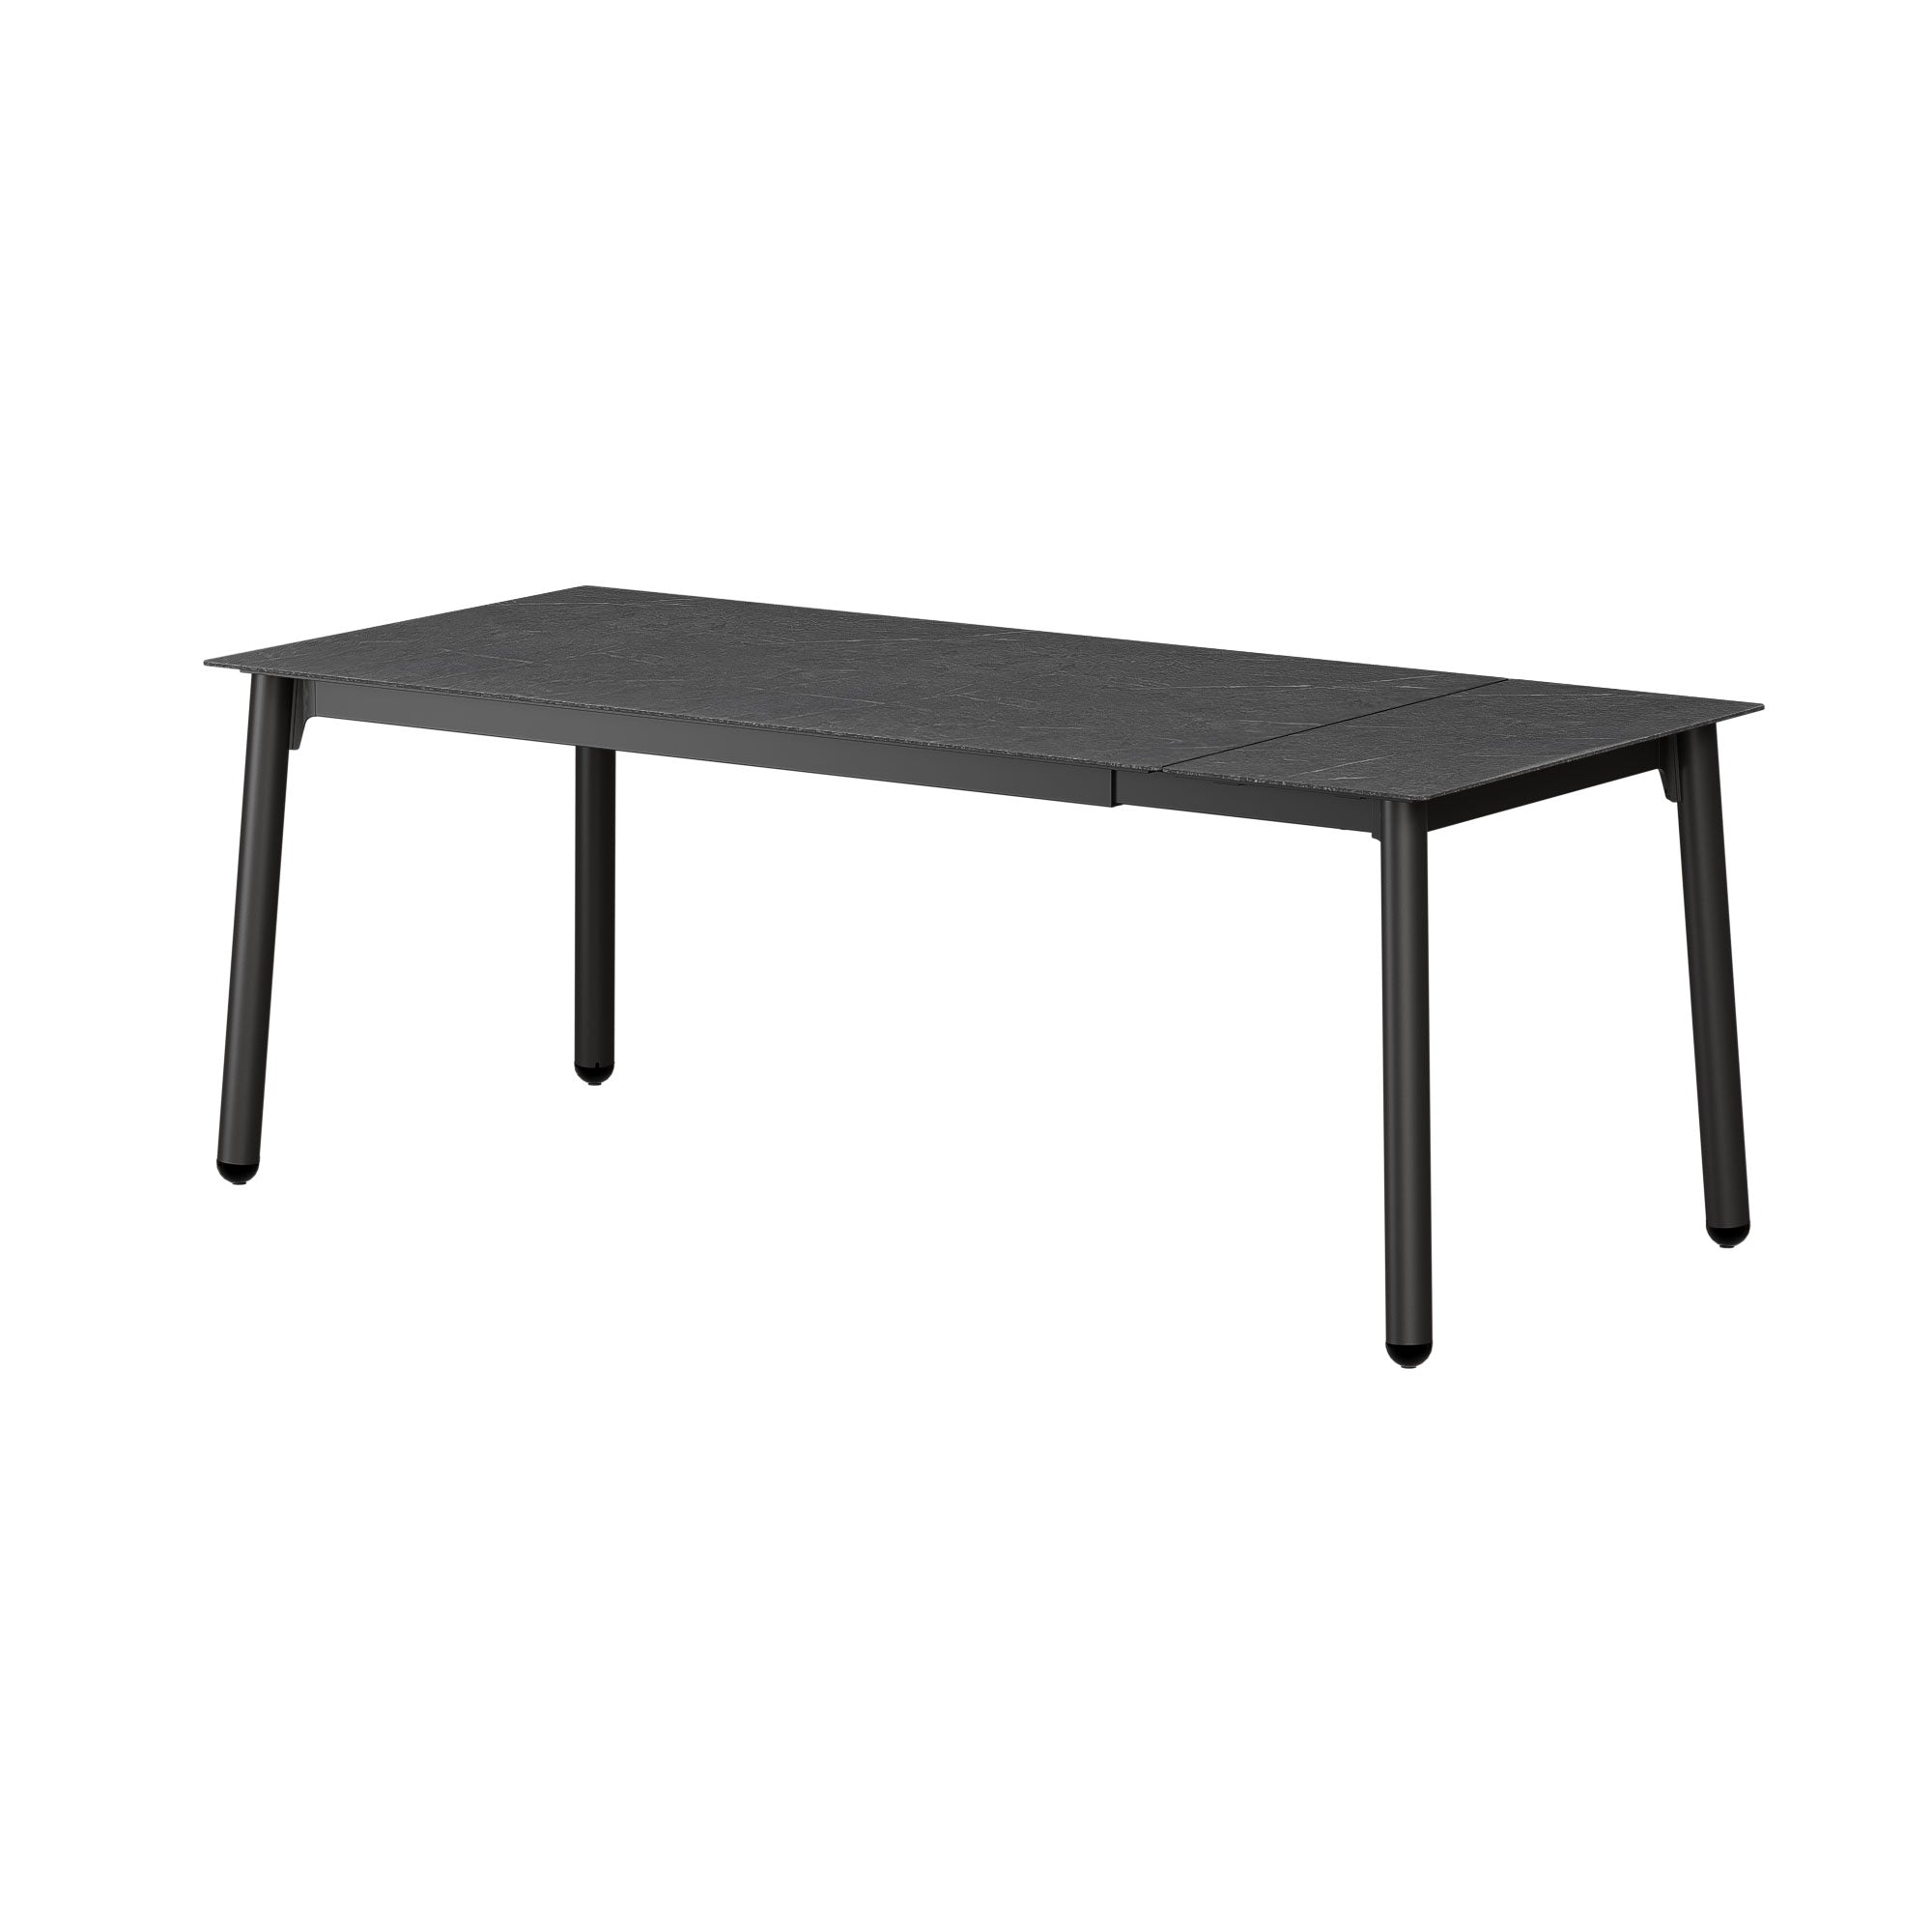 POINTHOUSE COMBO Extending 4-10 Seater Dining Table [Black]